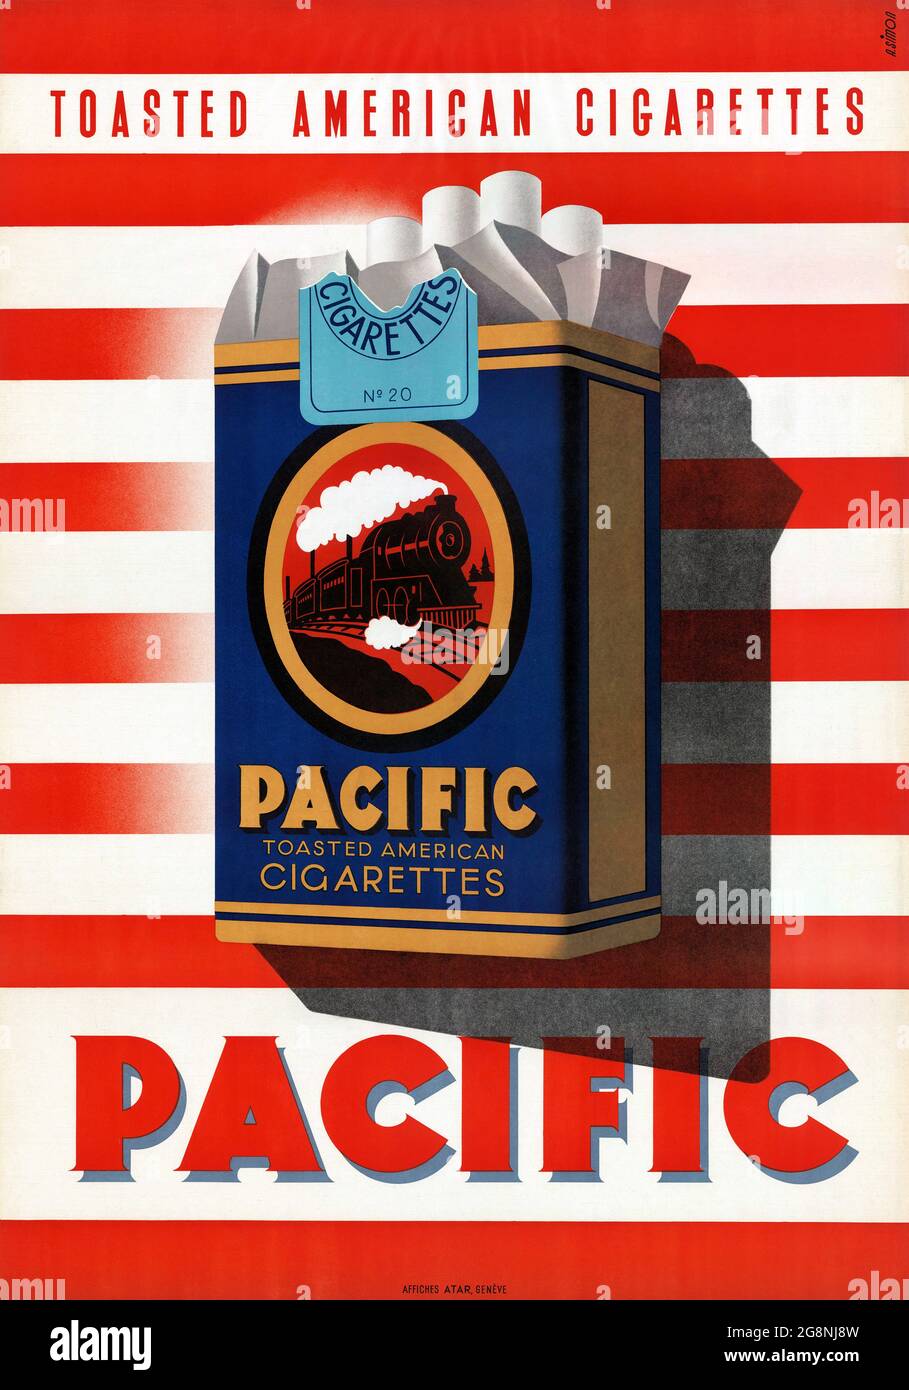 Pacific Toasted American Cigarettes by Andrée Simon. Restored vintage poster published ca. 1950. Stock Photo